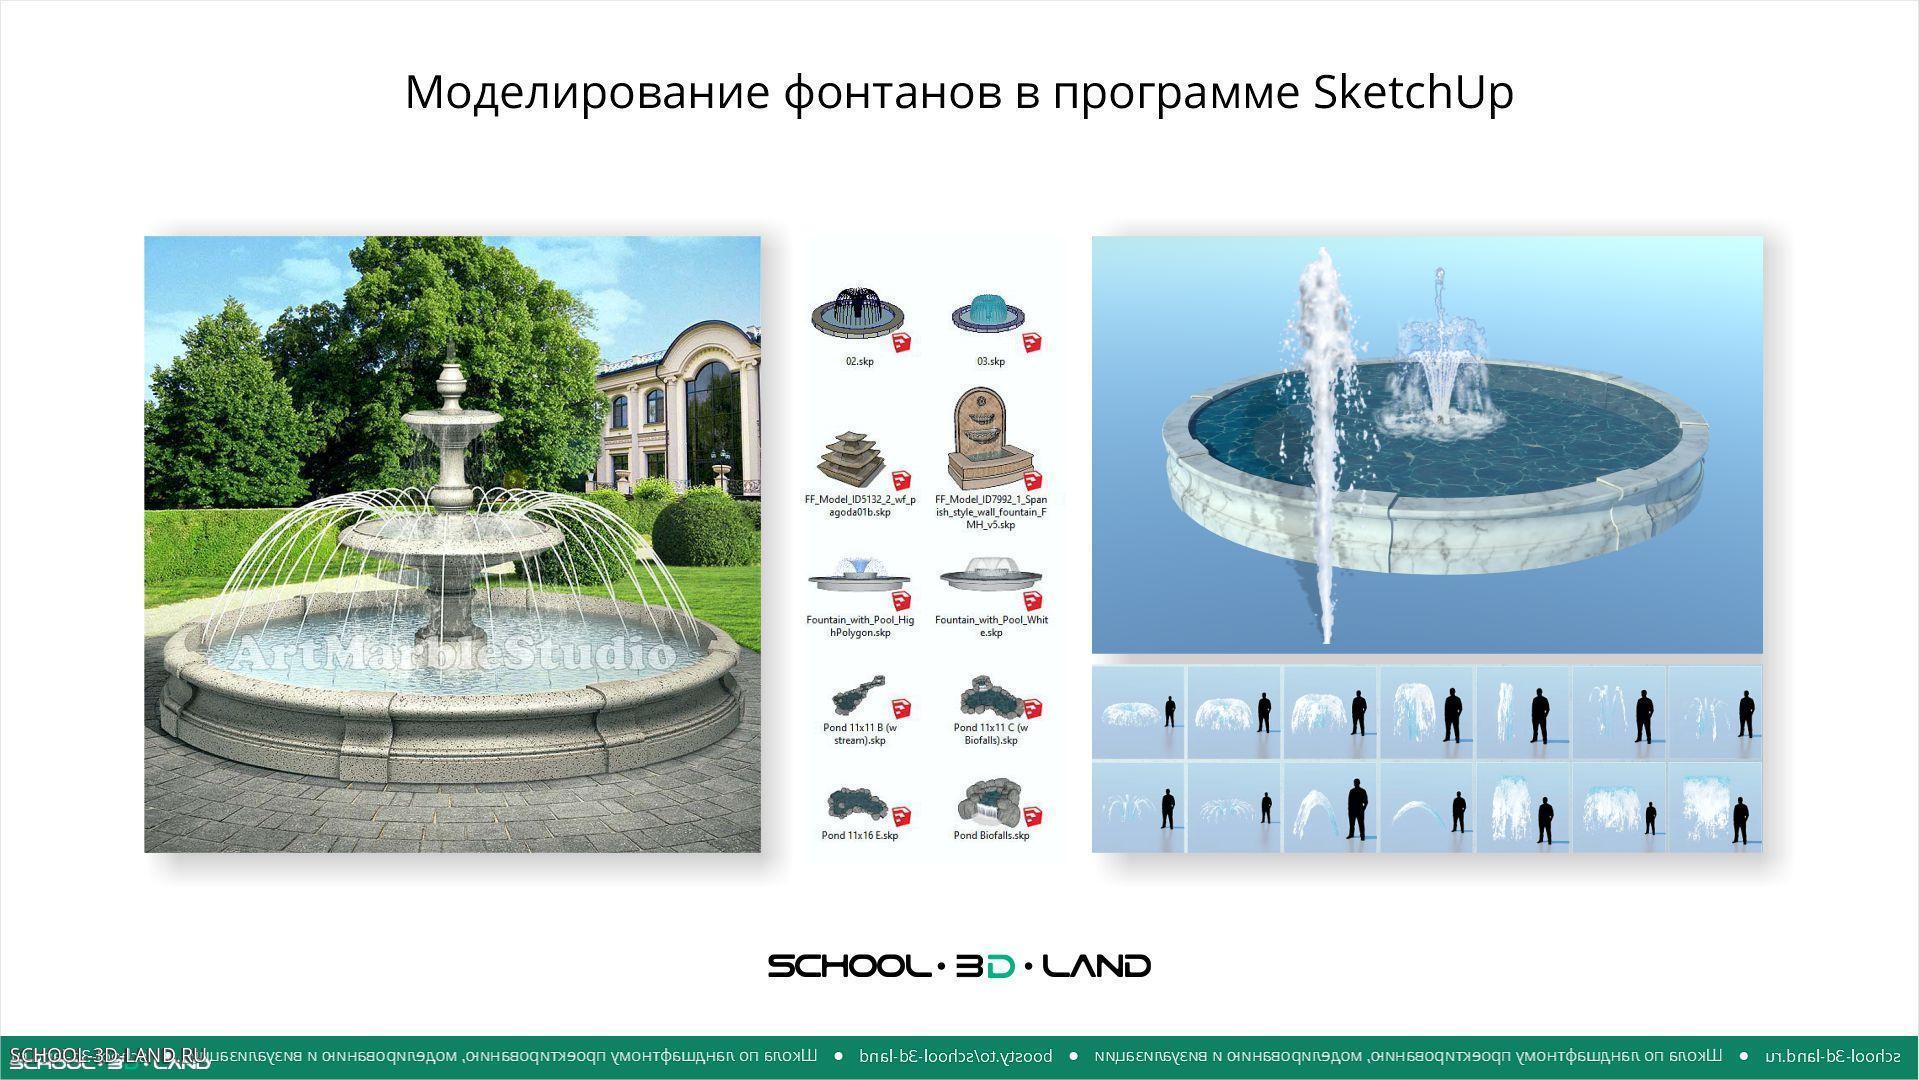 Modeling fountains in SketchUp